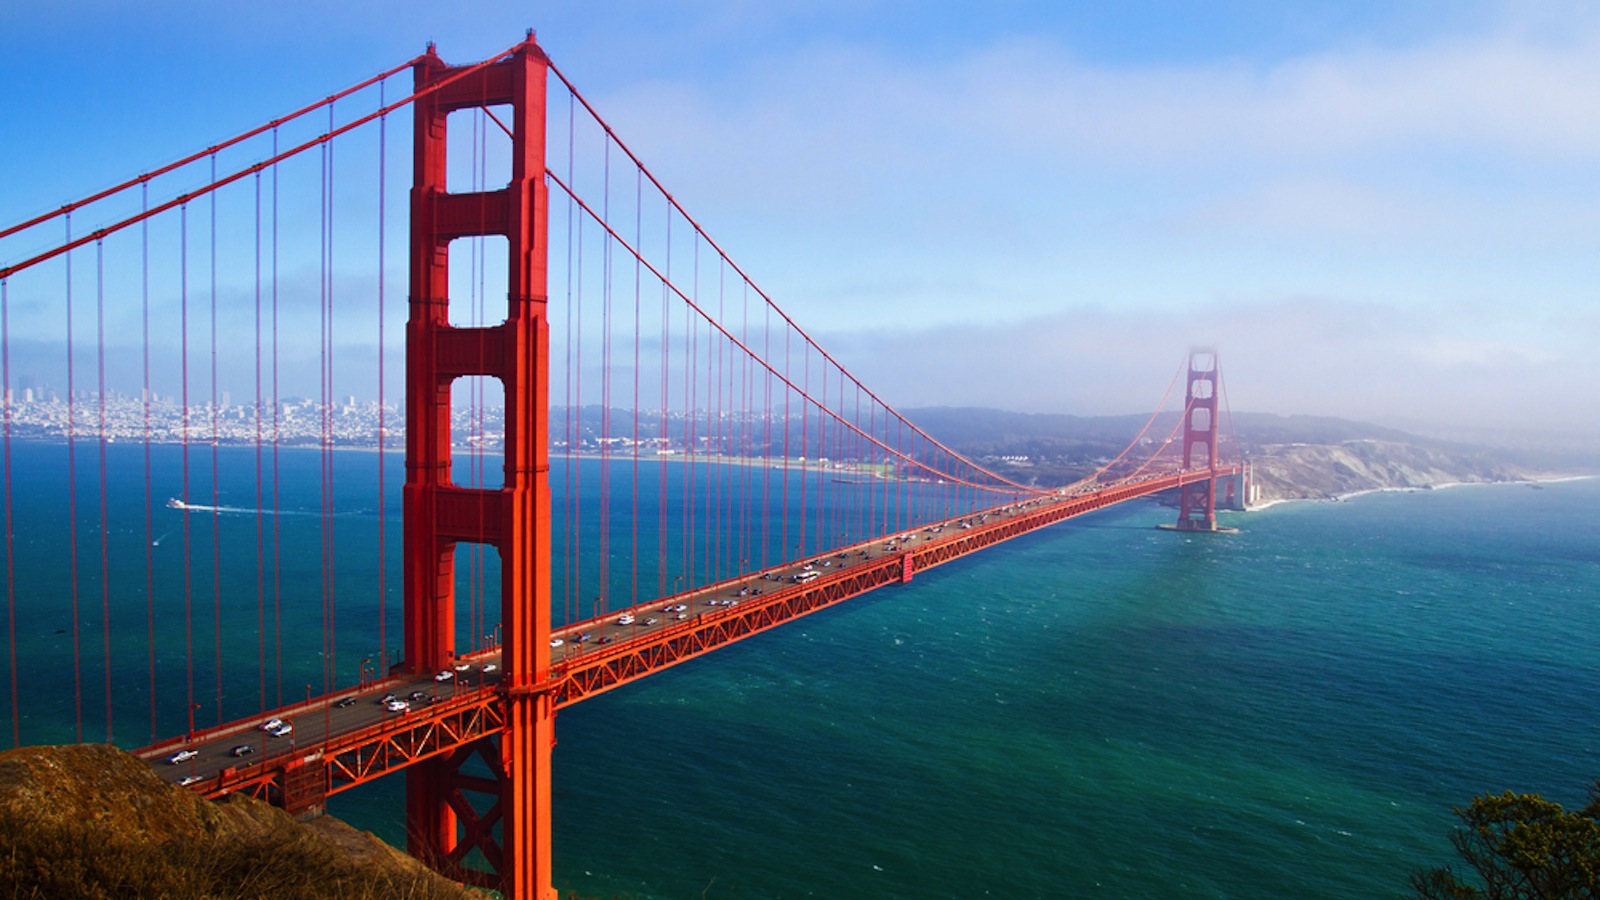 San Francisco one of top 10 places for video editors